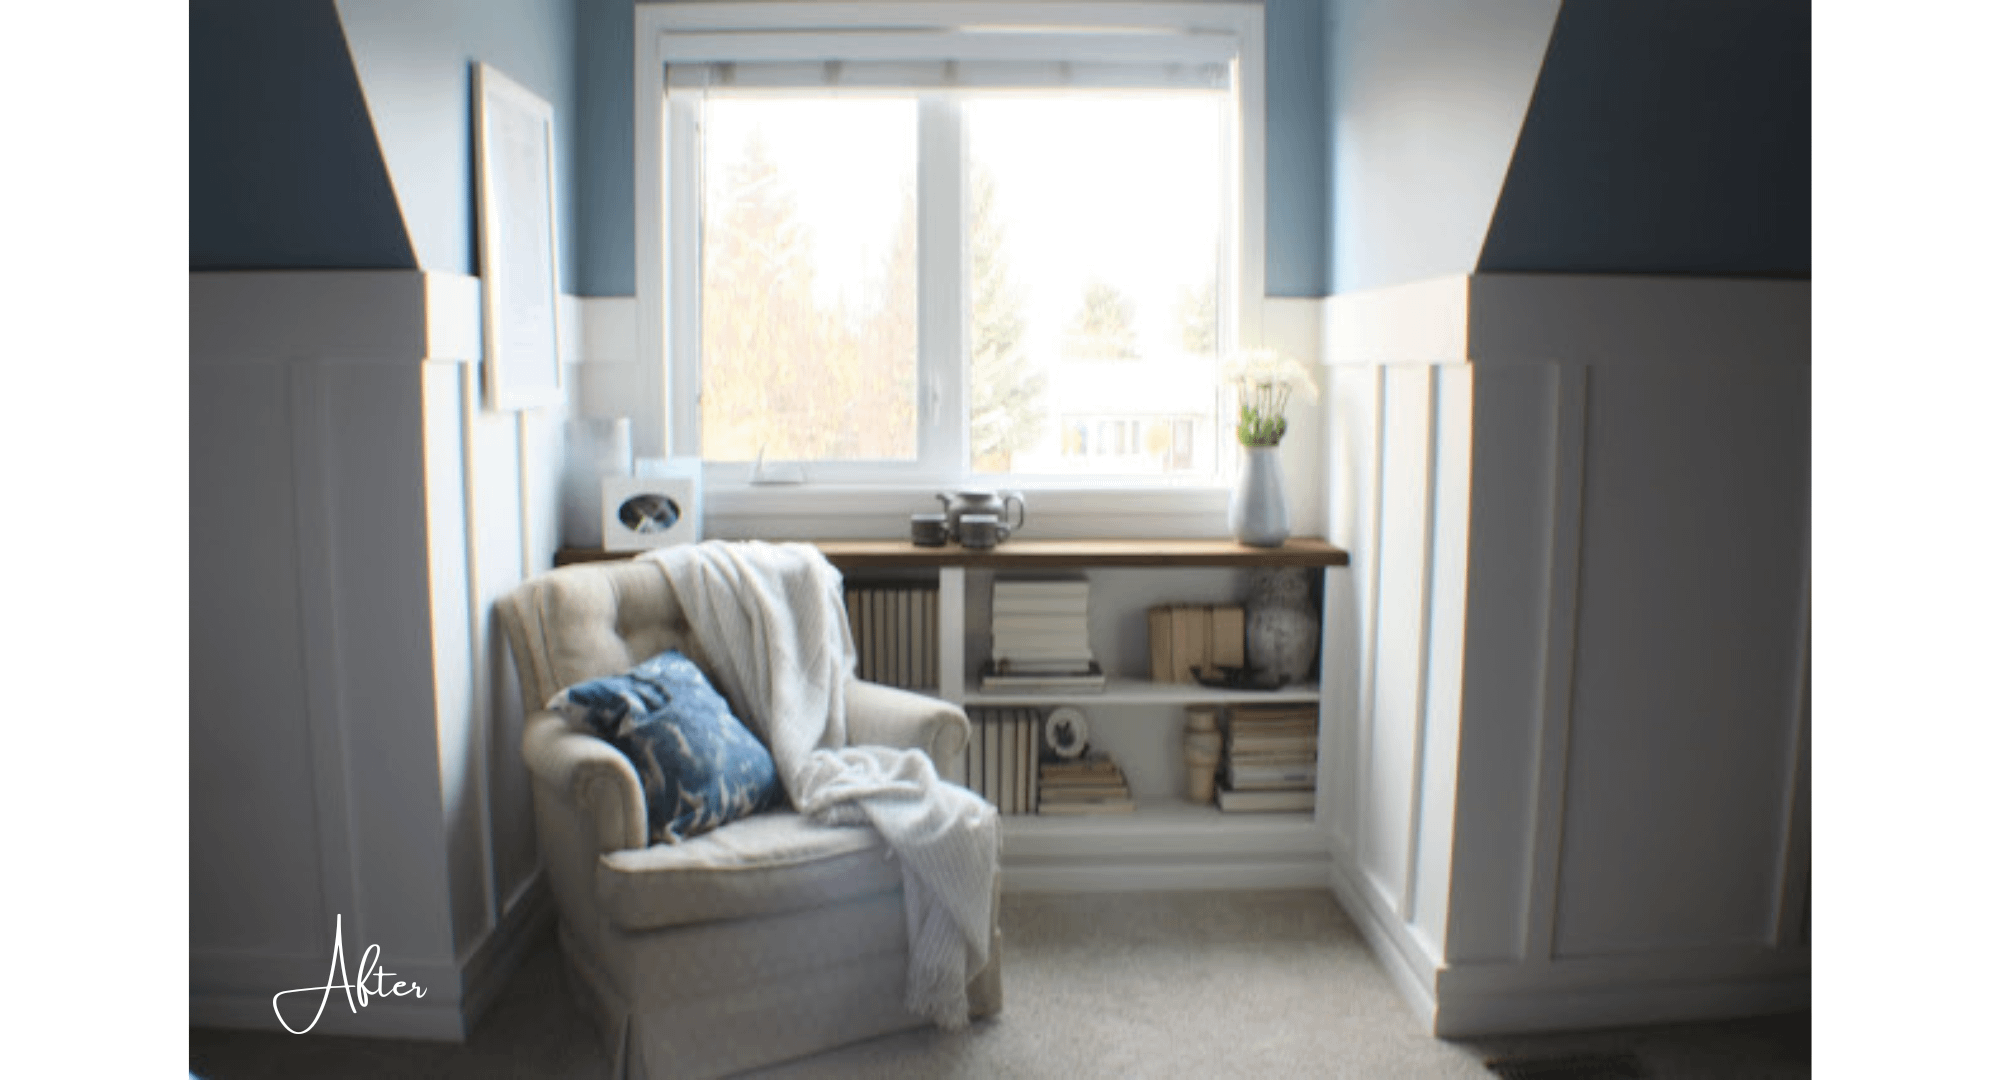 A reading nook is built in this bedroom transformation